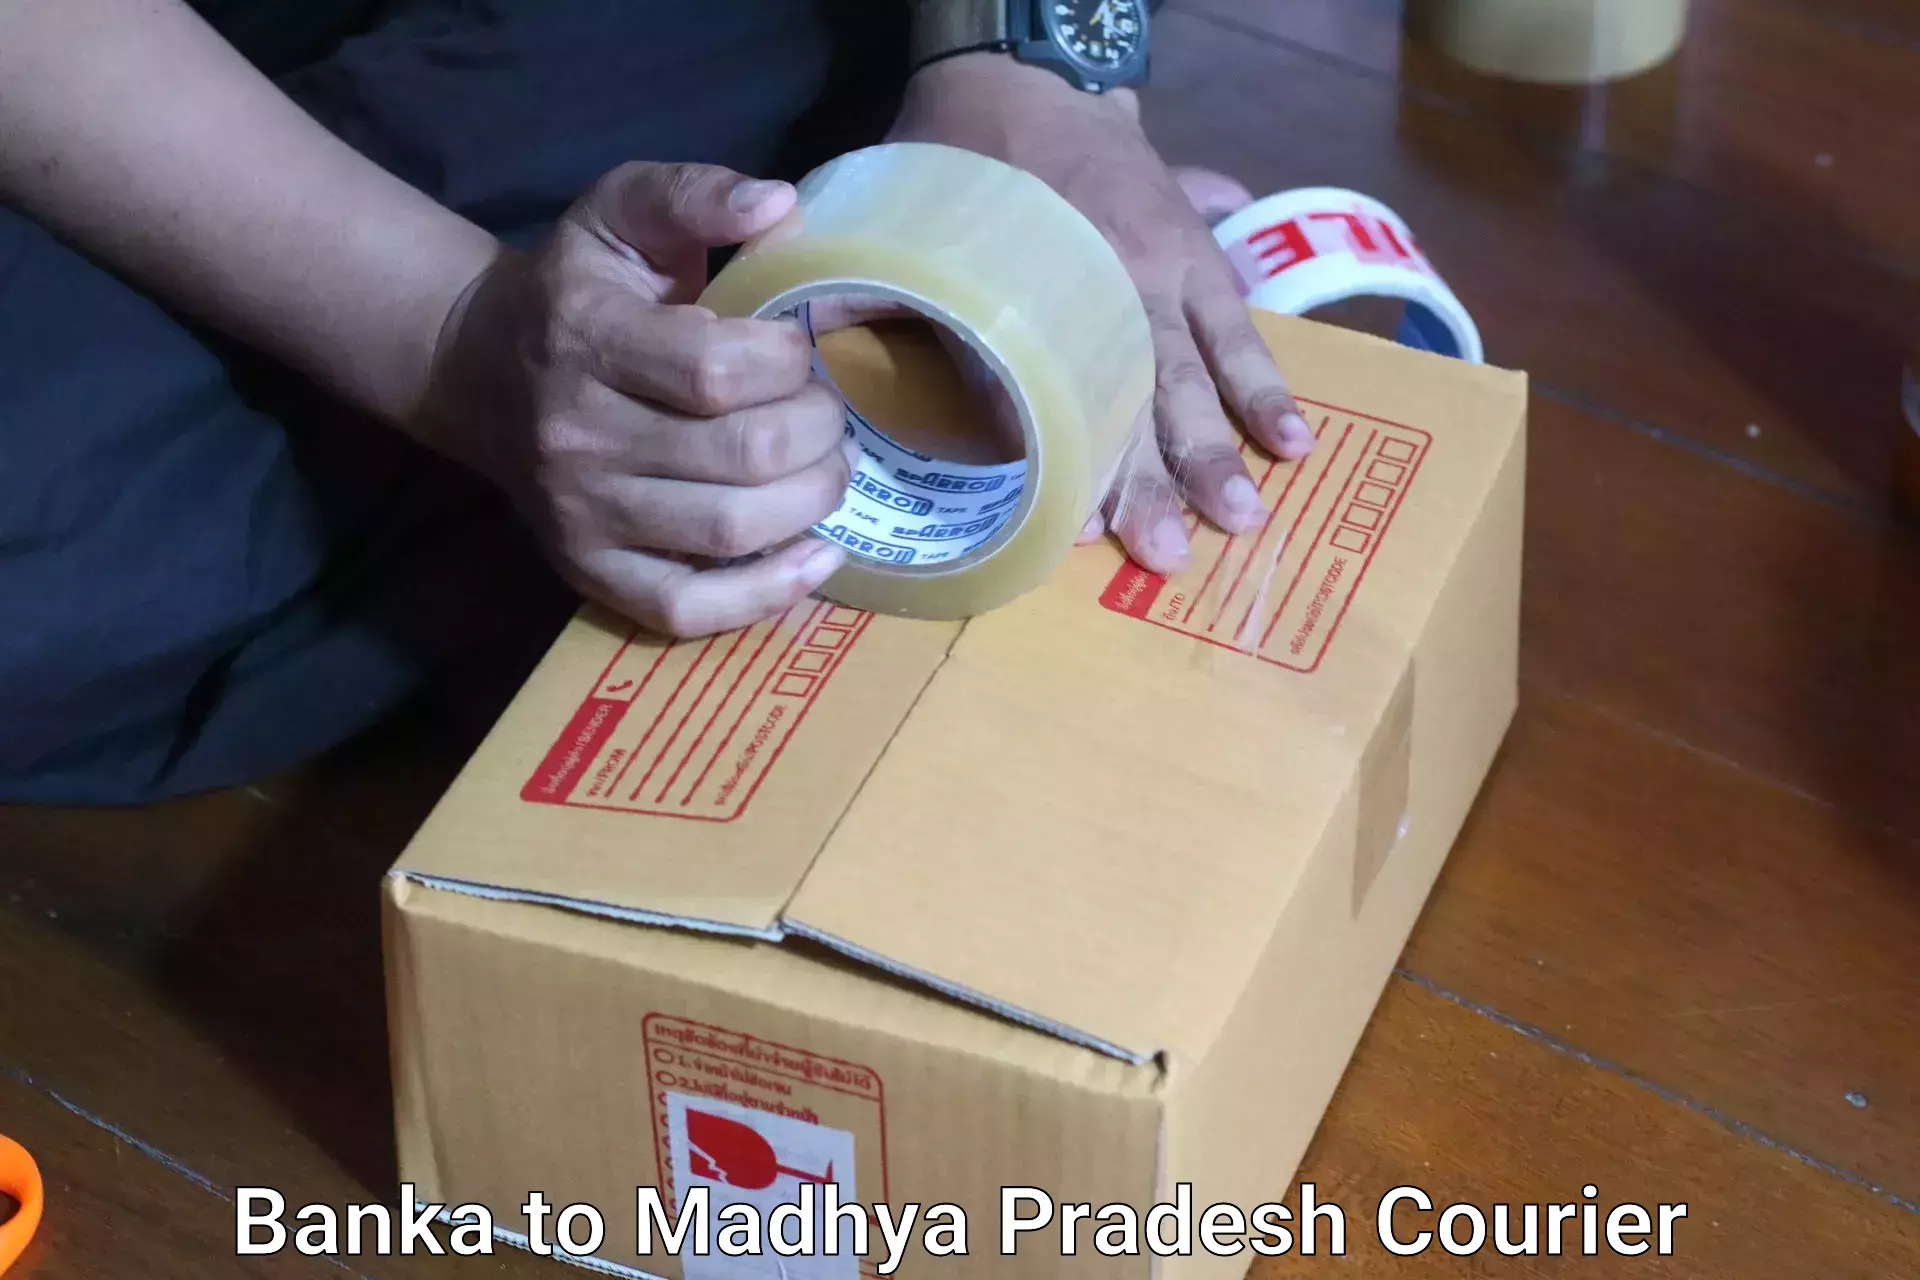 Personal effects shipping Banka to IIIT Bhopal